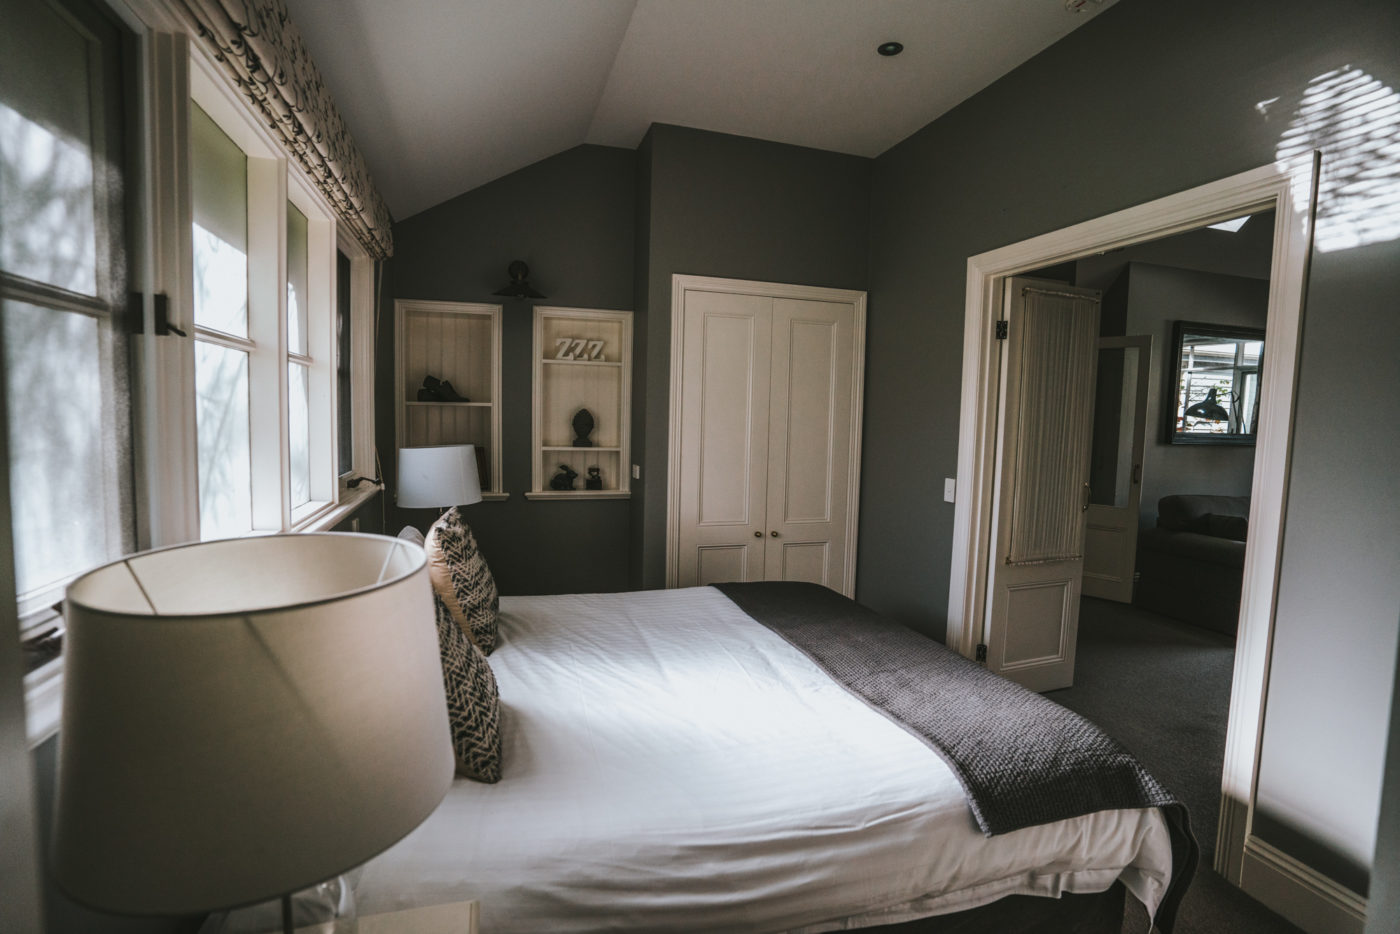 Comfortable bedrooms at the lodge.